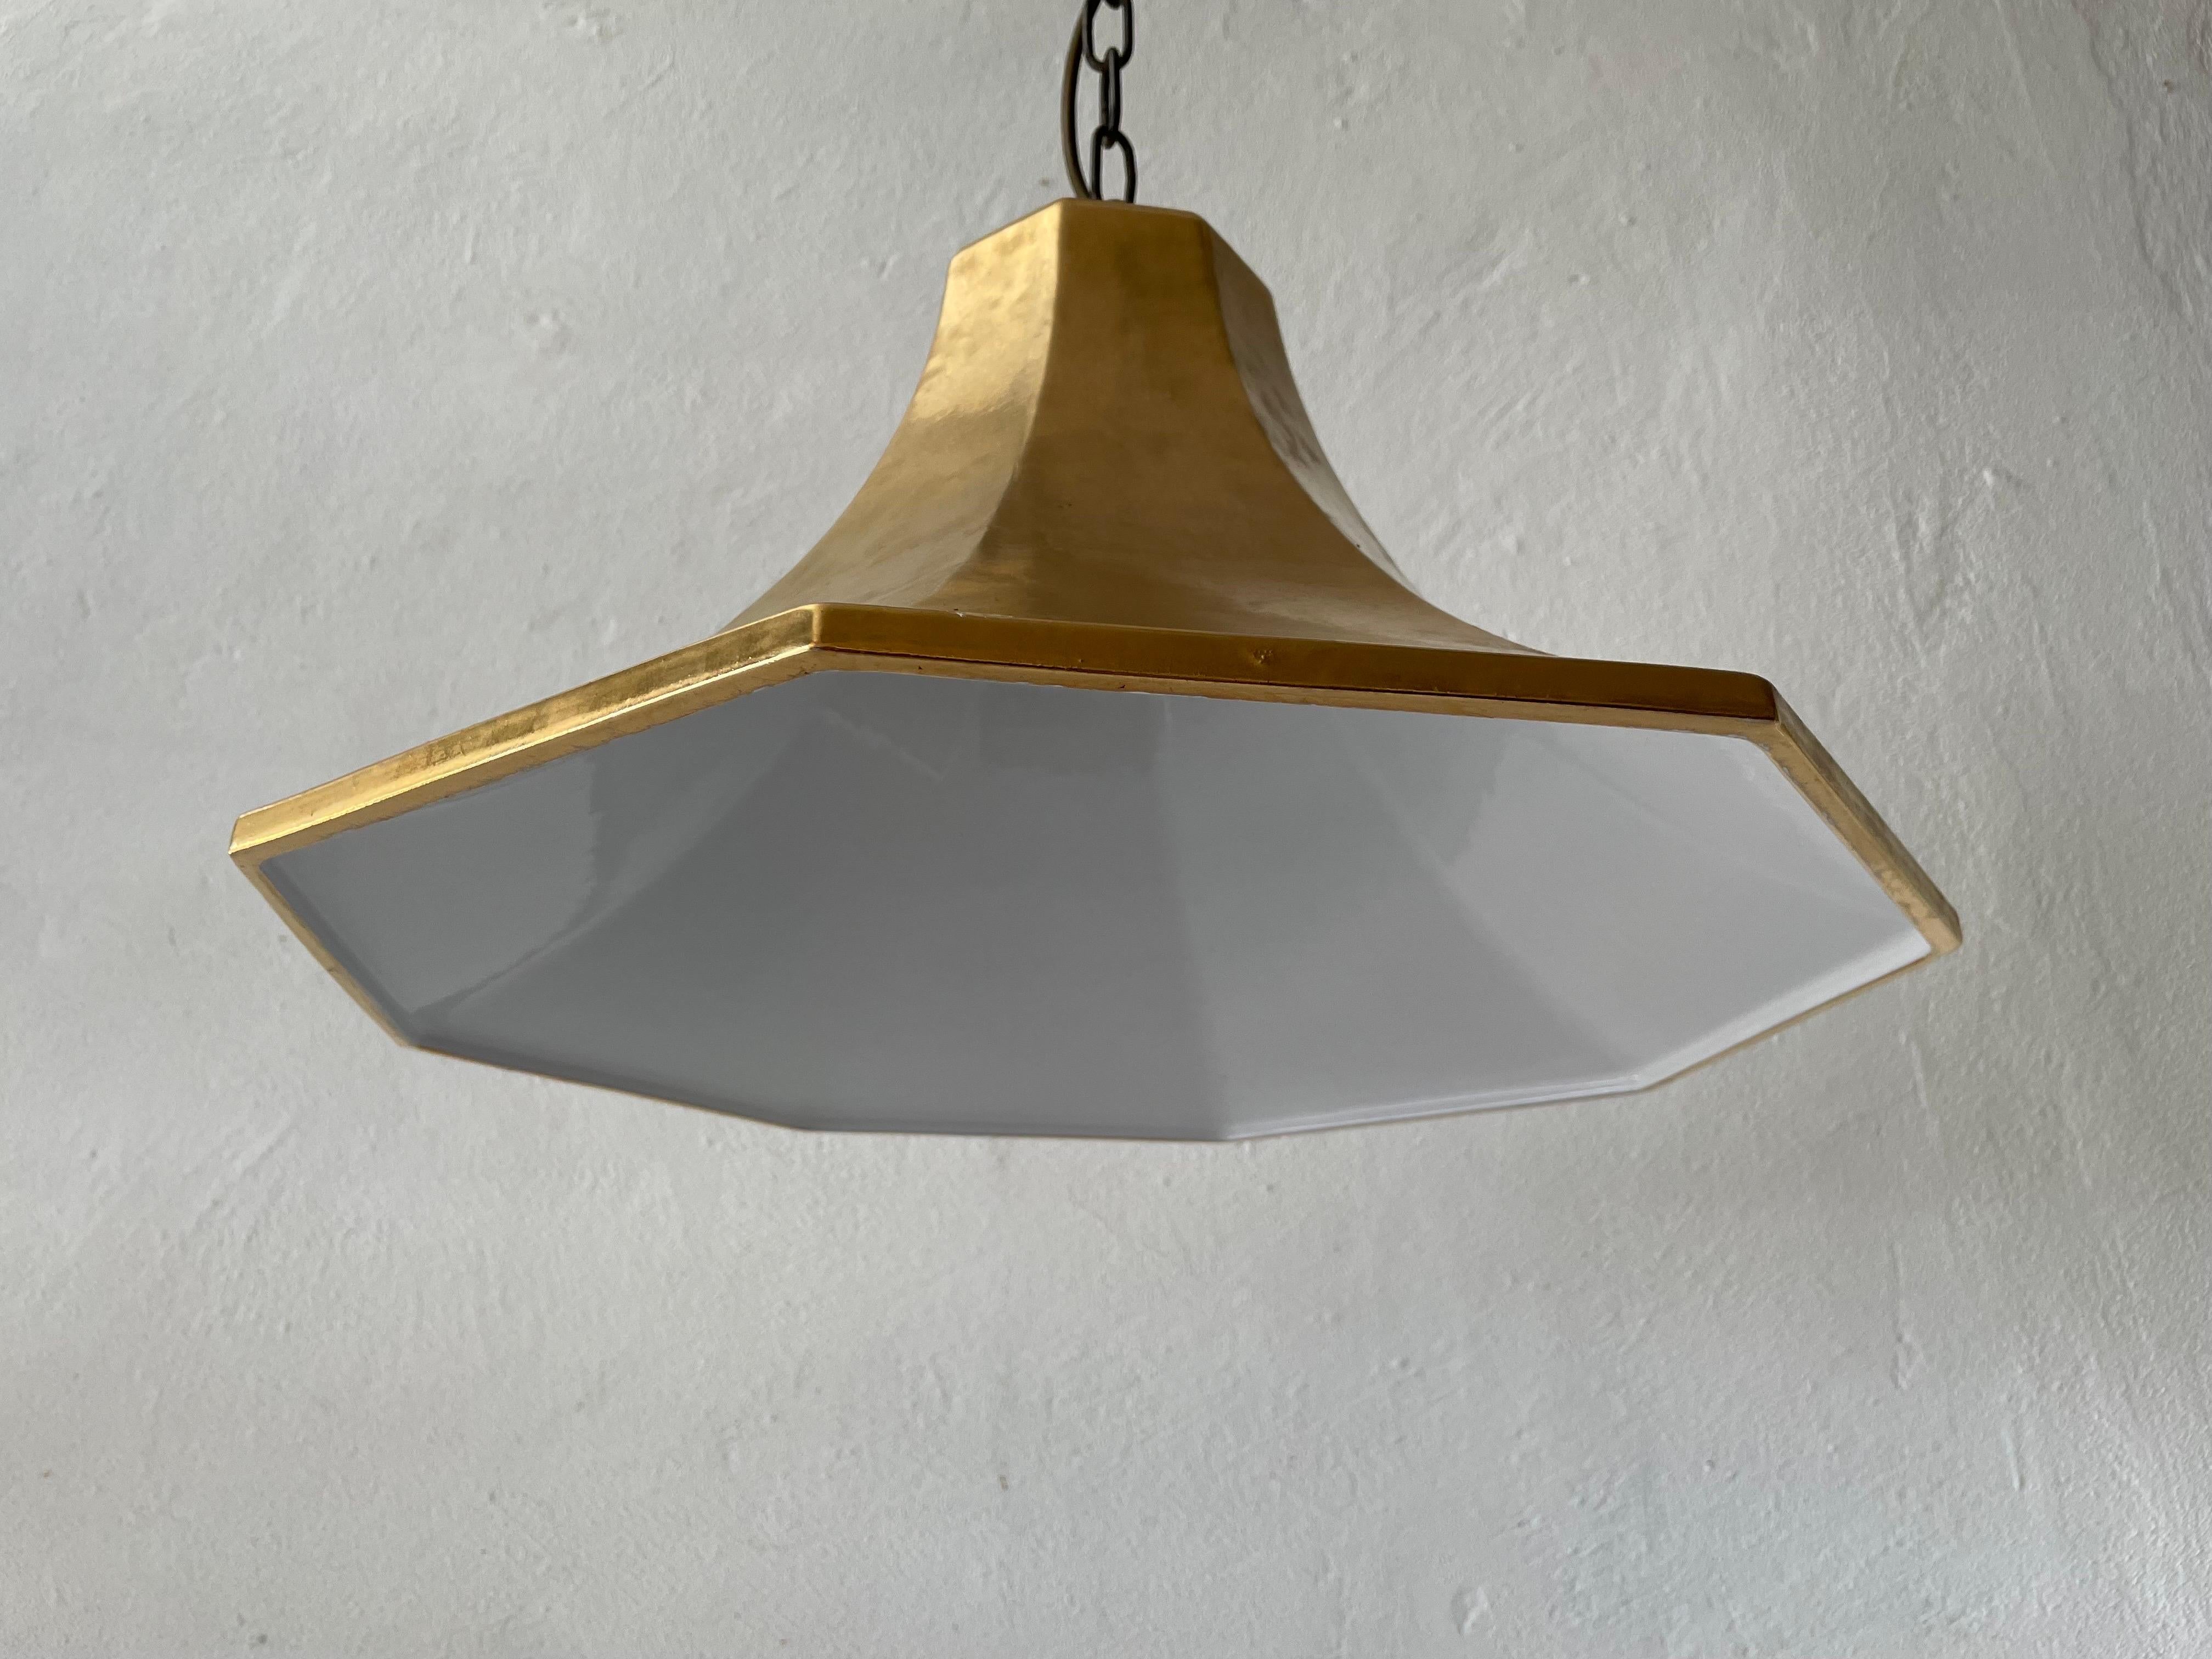 Exclusive gold ceramic pendant lamp by Licht+Wohnen, Karlsruhe, 1970s, Germany.

Lampshade is in very good vintage condition.

This lamp works with E27 light bulb. 
Wired and suitable to use with 220V and 110V for all